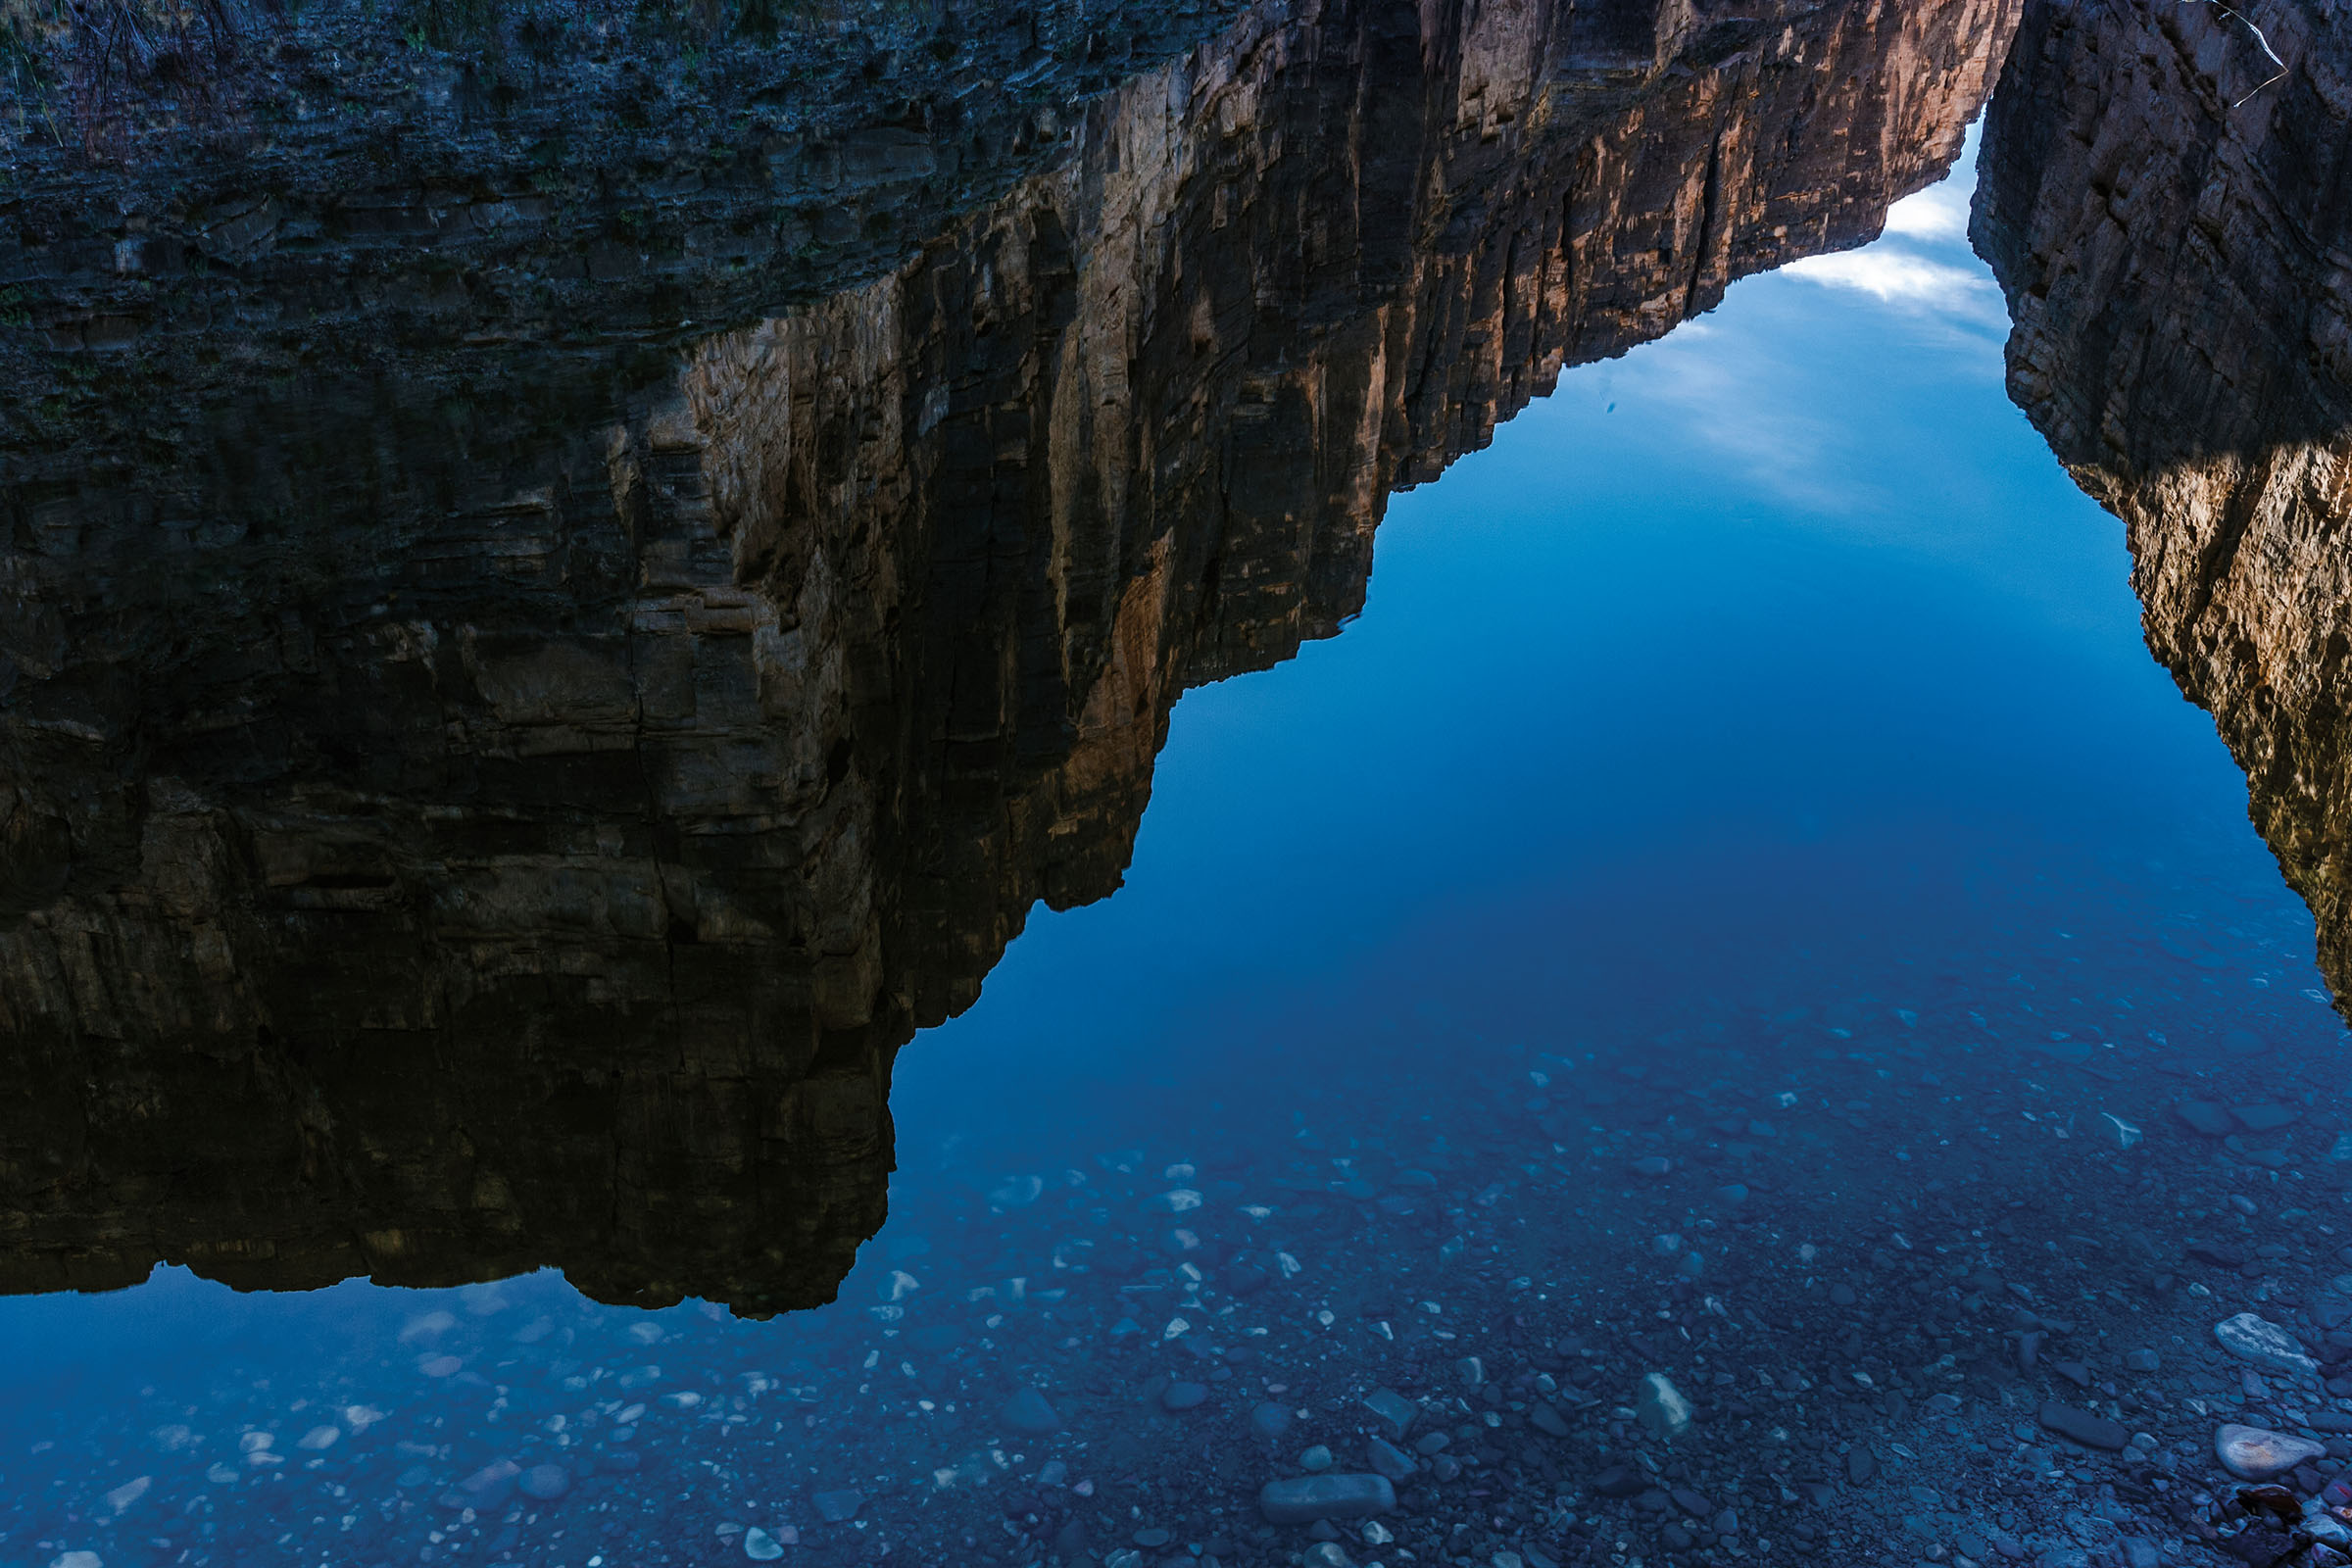 The reflection of a tall rocky canyon wall over blue water